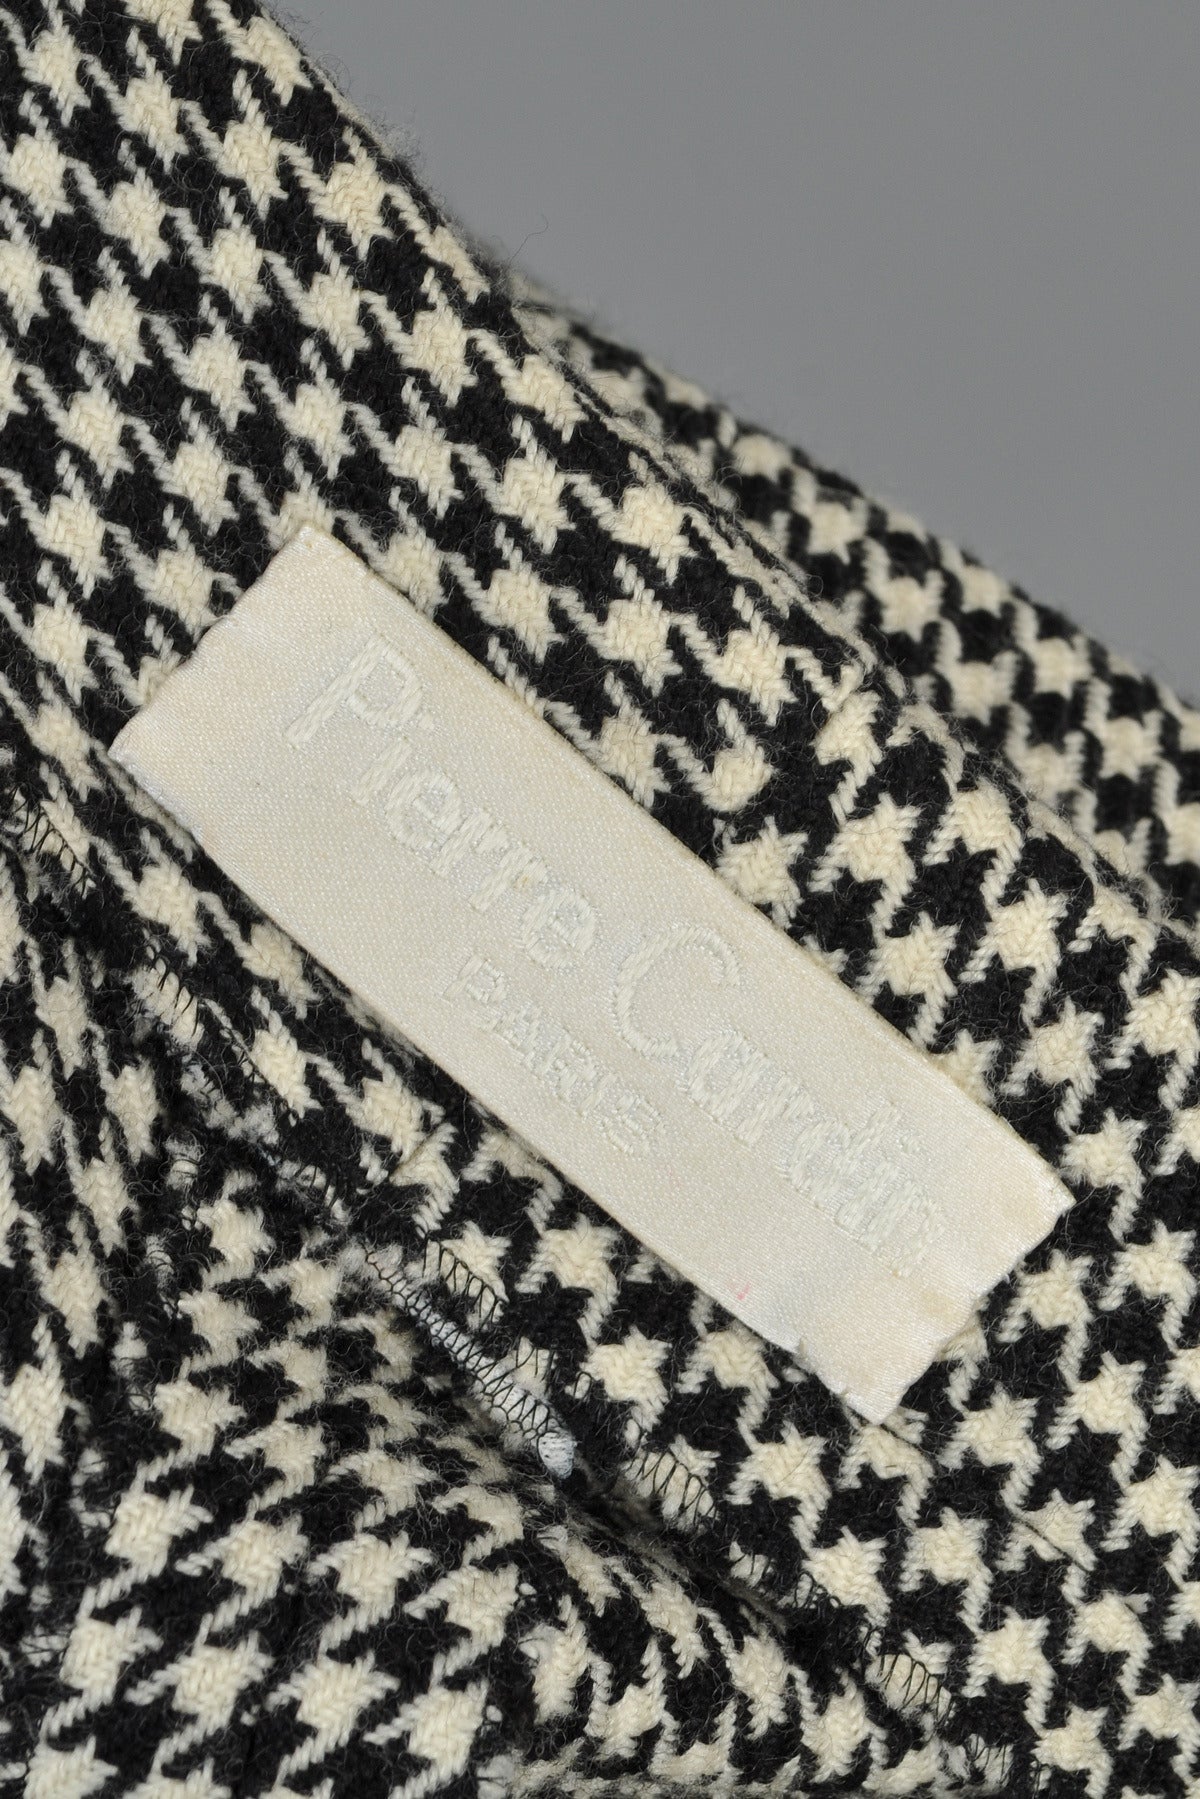 F/W 93 Pierre Cardin Haute Couture Houndstooth Vinyl Tie Jacket For Sale 5